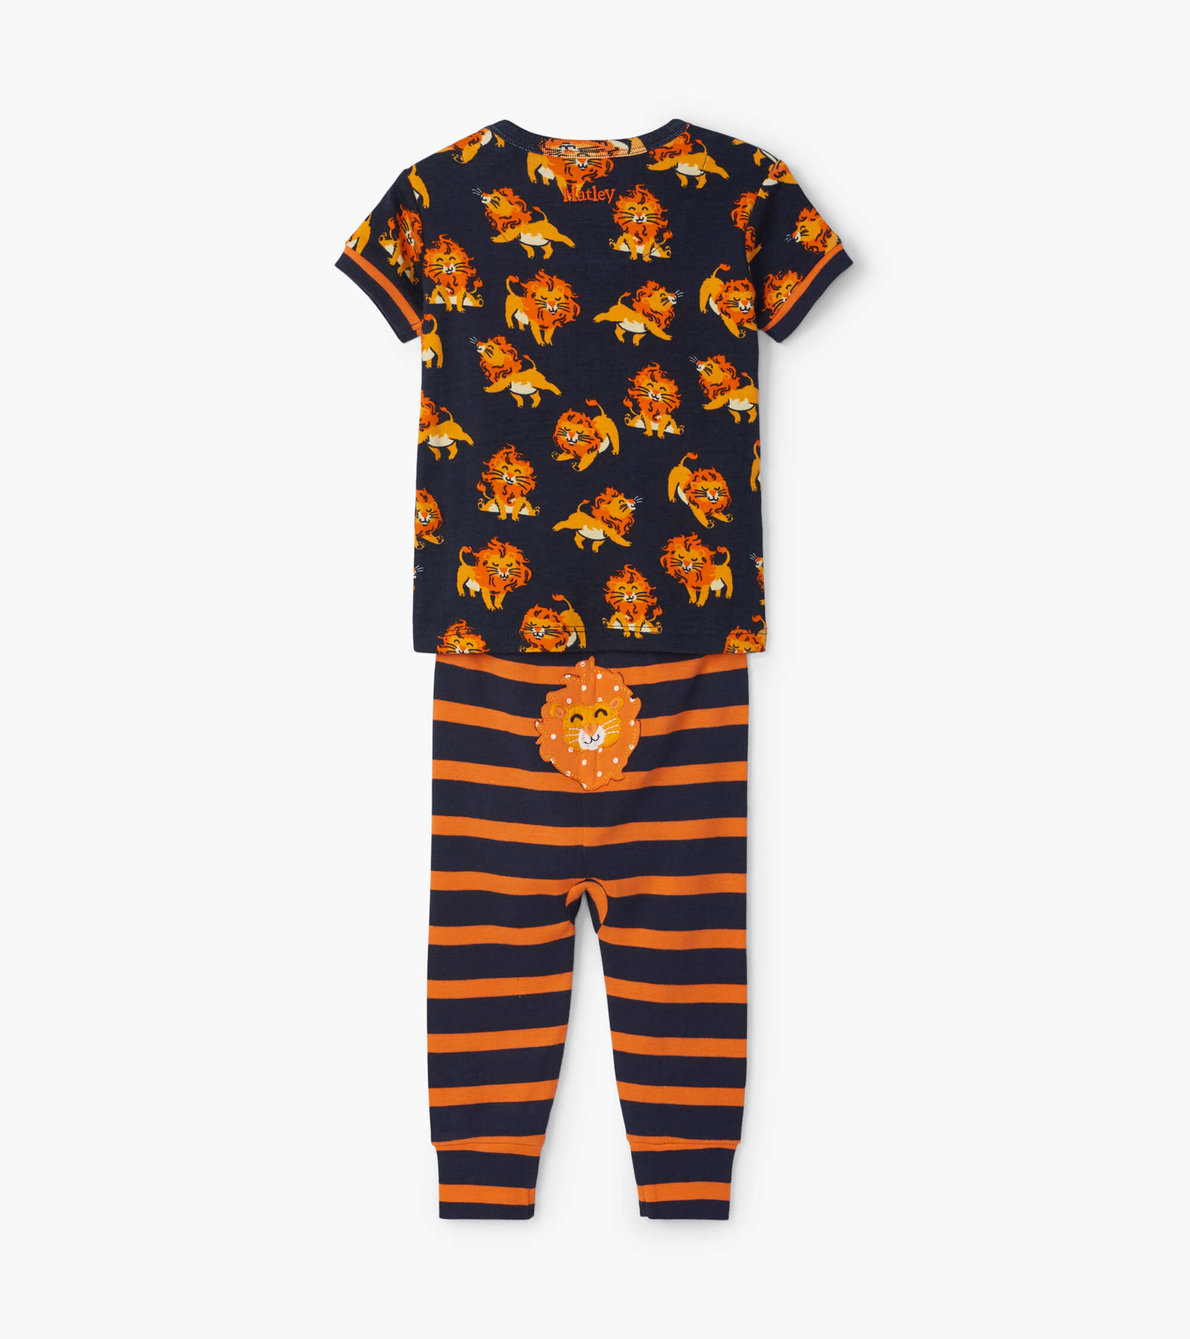 View larger image of Little Cubs Organic Cotton Baby Short Sleeve Pajama Set